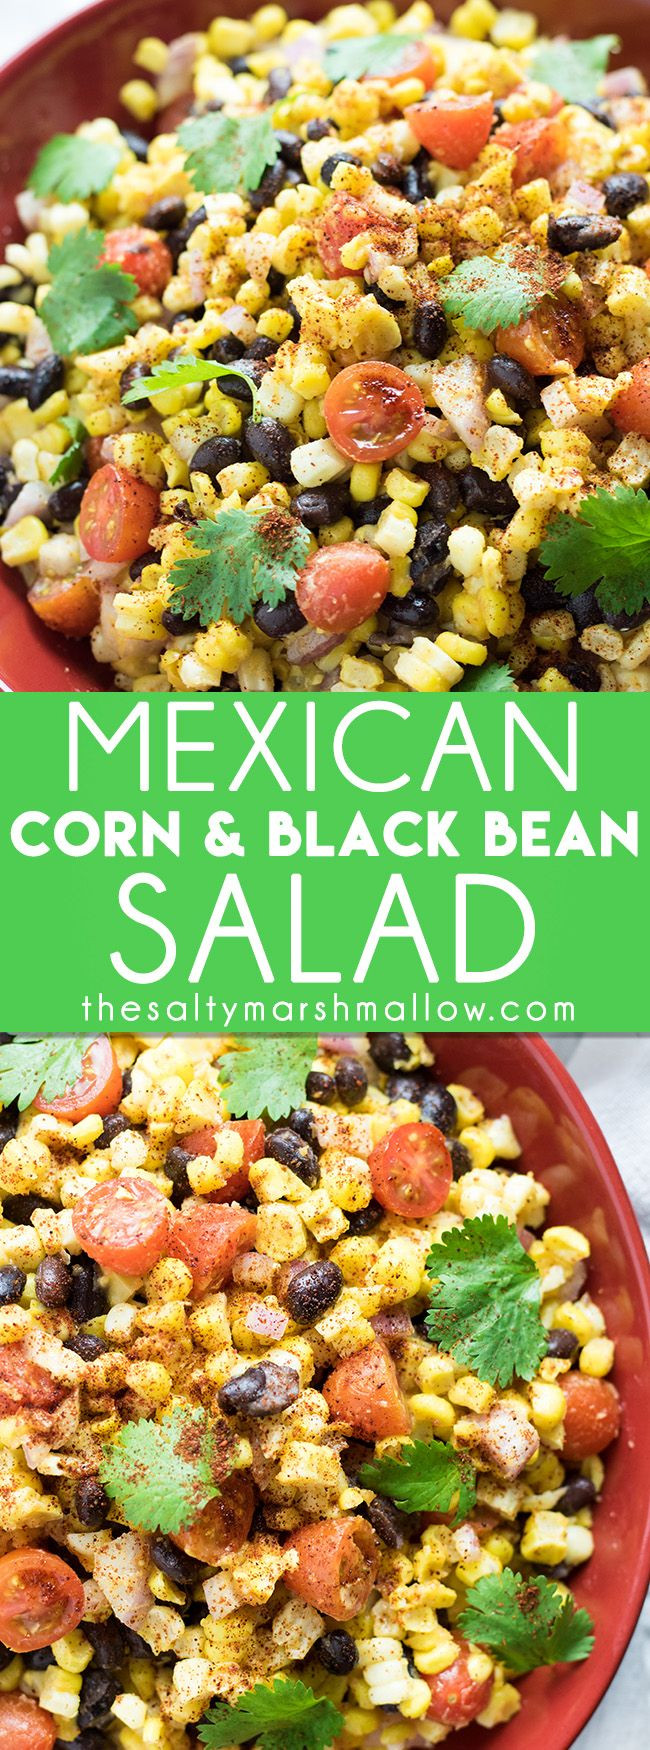 Mexican Side Dishes Healthy
 25 best ideas about Mexican corn salad on Pinterest